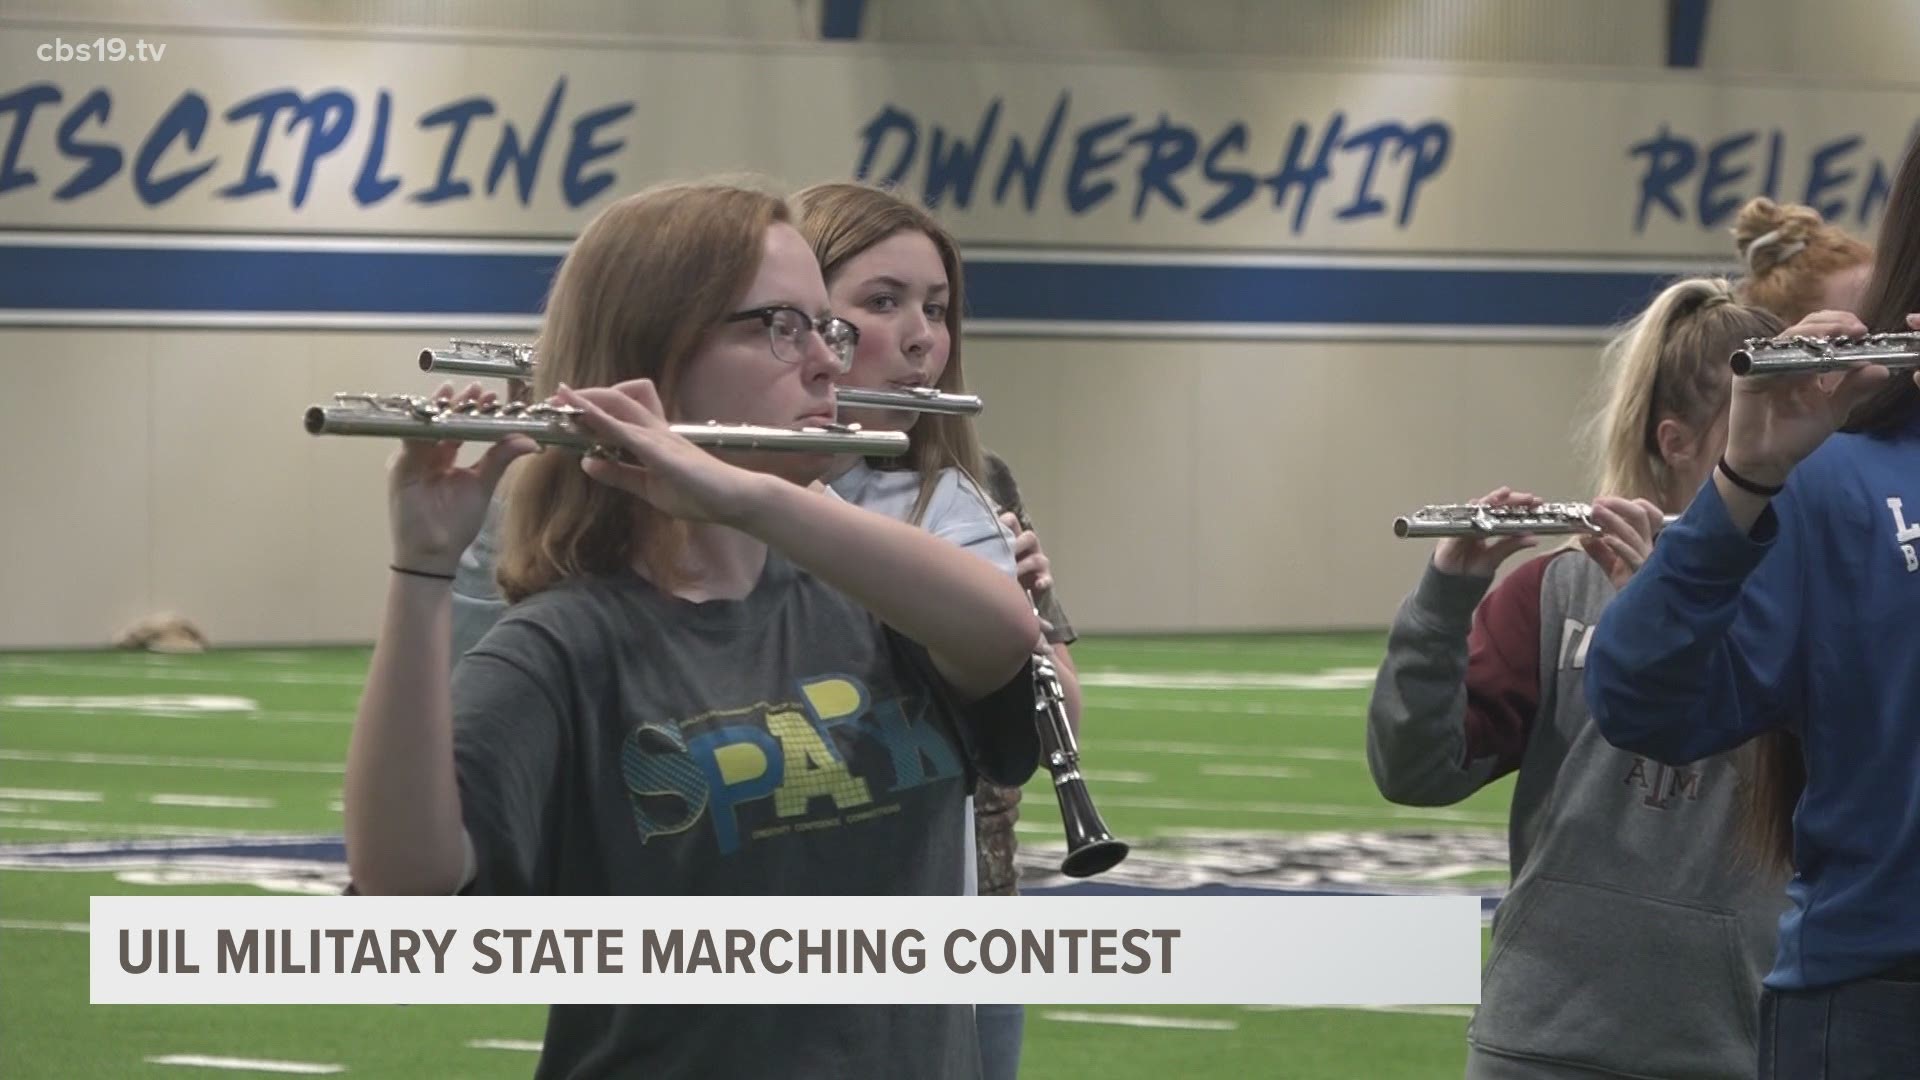 The Lindale Marching Band will be one of several schools competing in the first Military Class Marching Band Championship sponsored by the UIL.